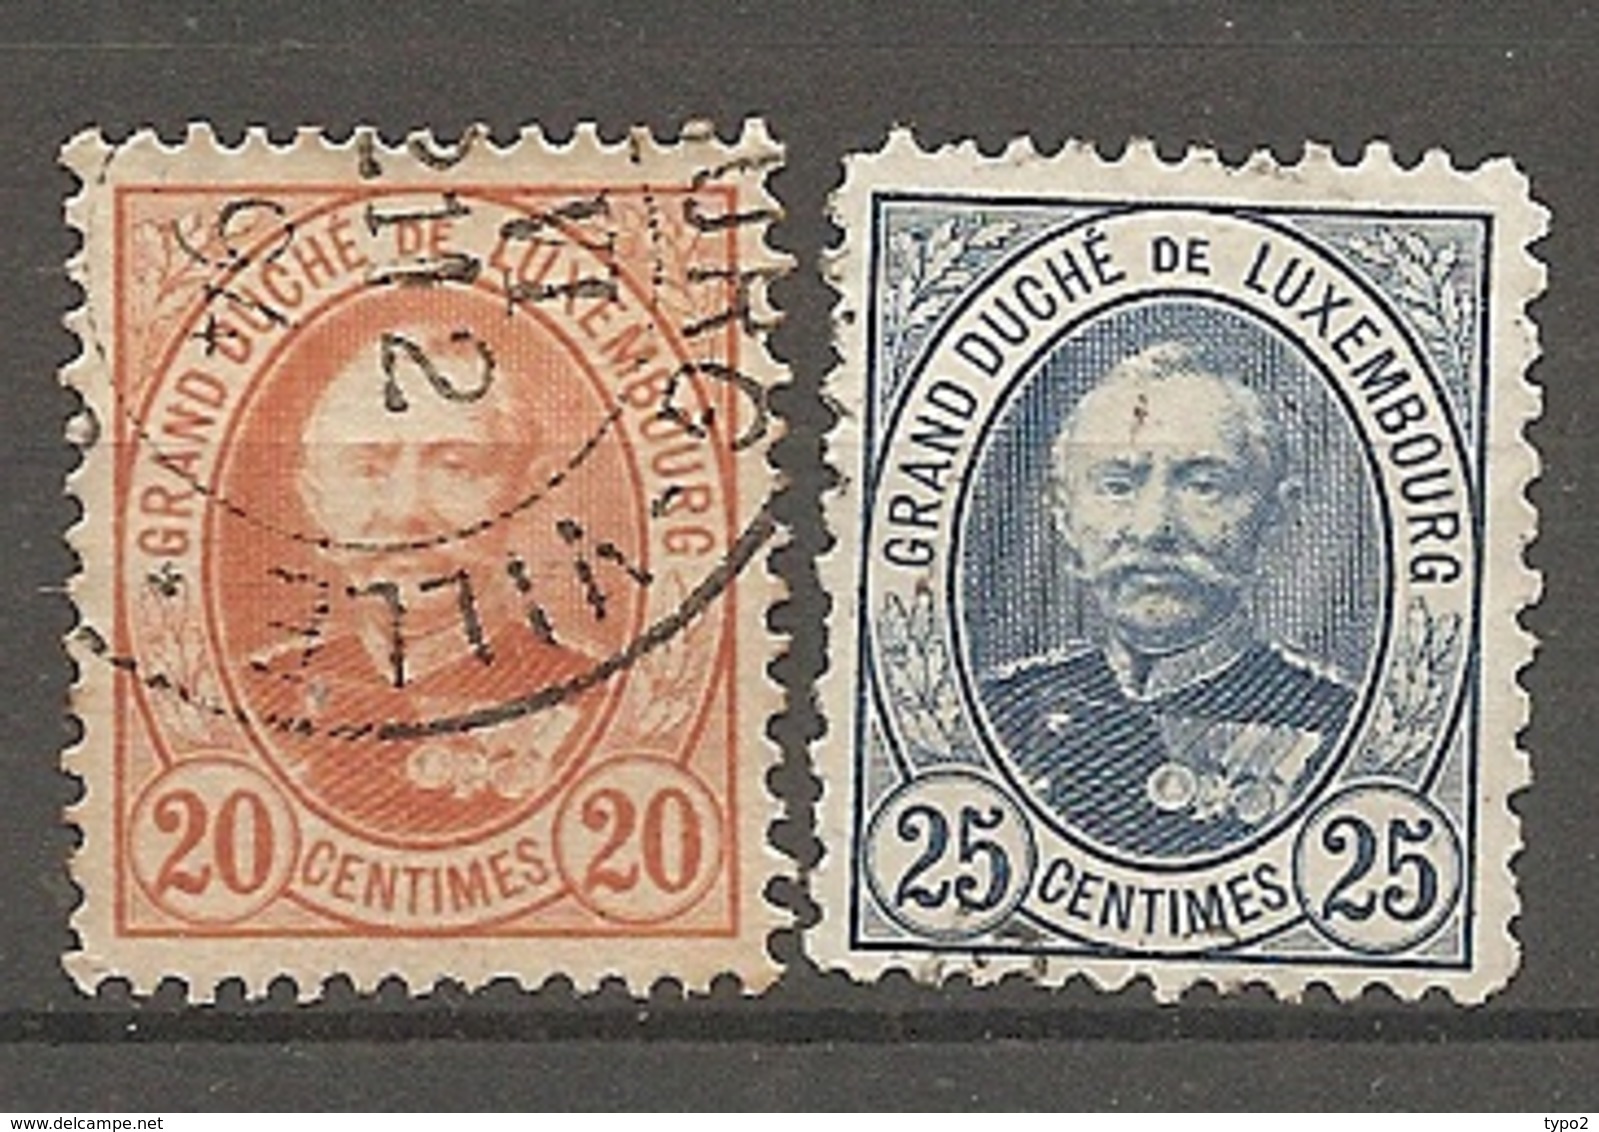 LUX 1891 Yv. N° 61,62  (o)  20 C, 15c   Adolphe Ier Cote 1,25 Euro BE  2 Scans - 1891 Adolphe De Face